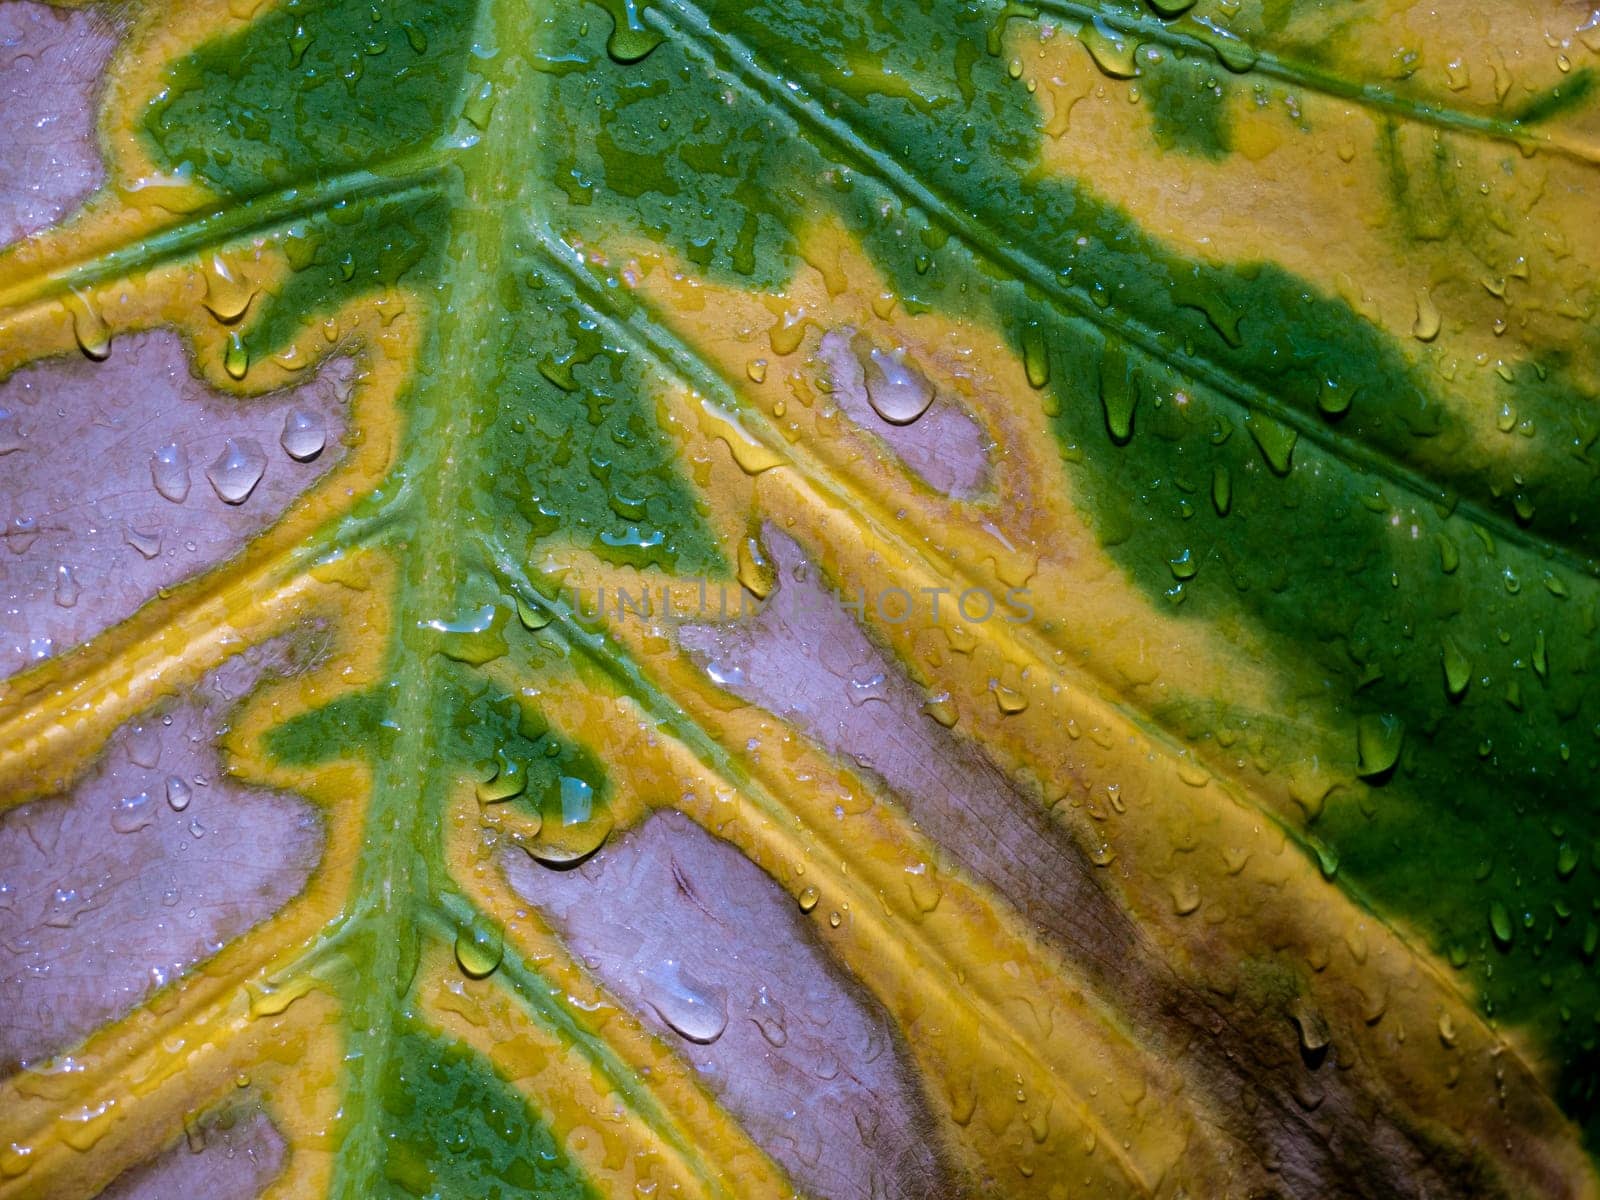 The wounded surface of a withering Alocasia leaf by Satakorn